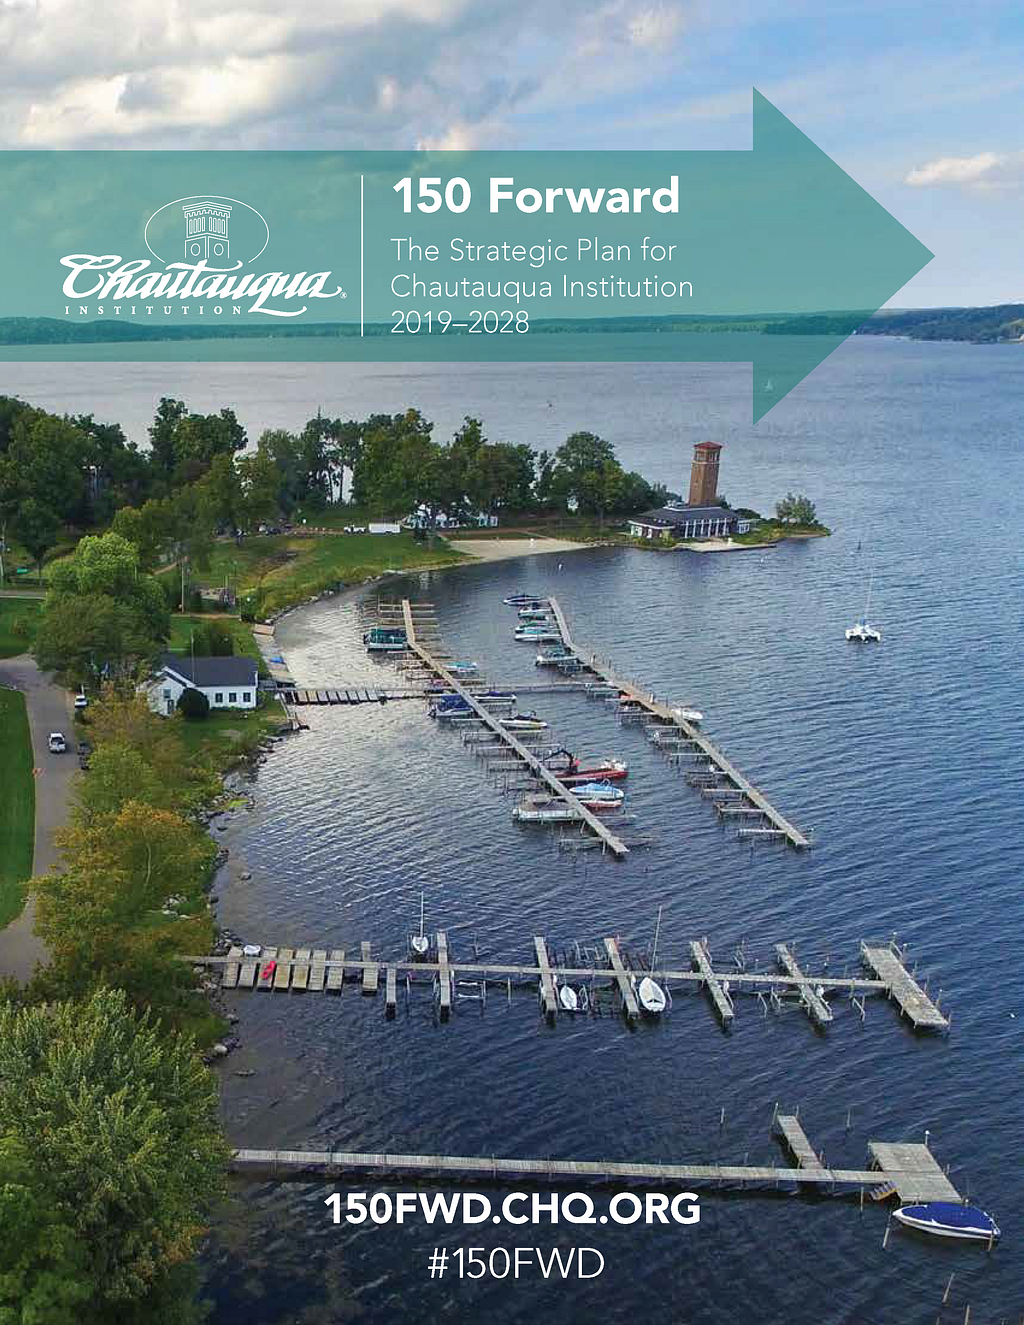 The cover of the printed edition of 150 Forward, available download at 150FWD.chq.org.